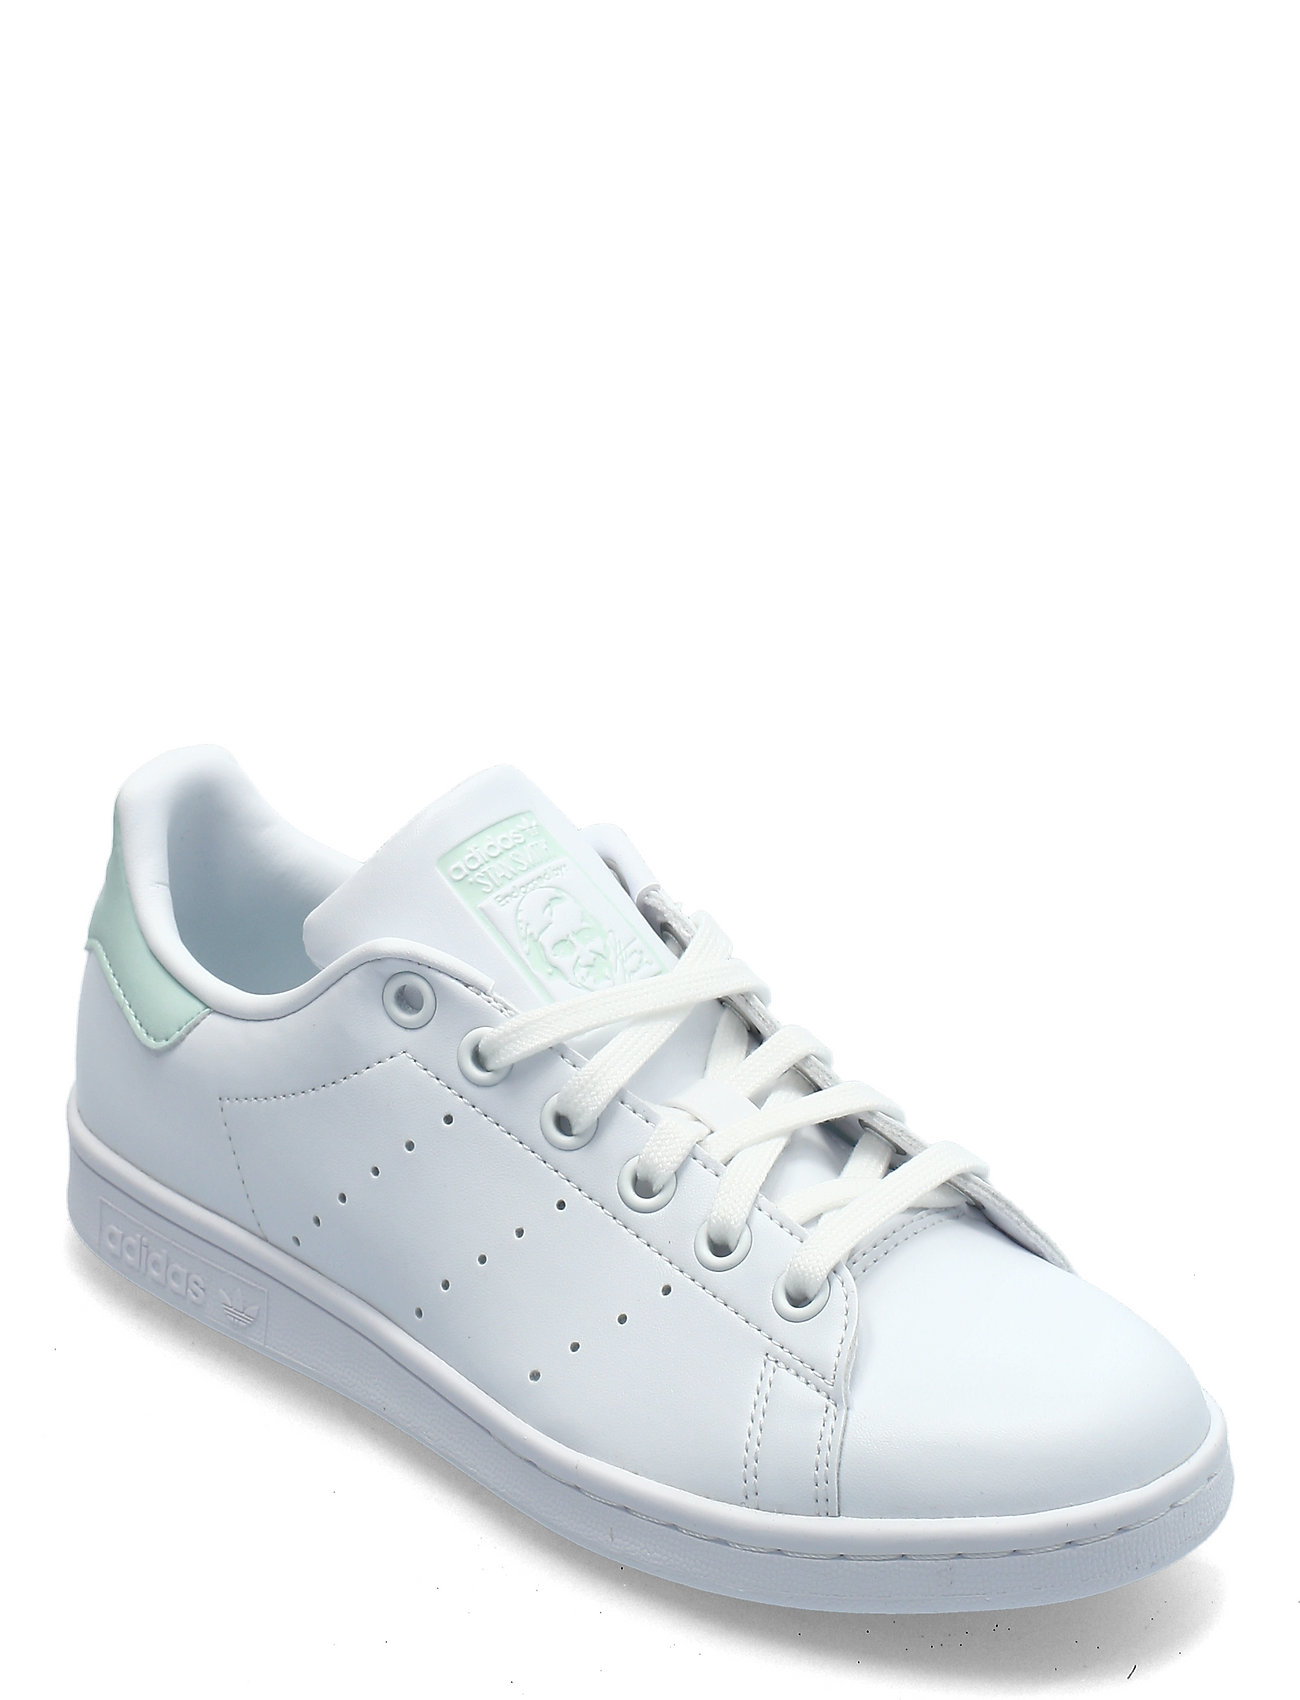 adidas Originals Stan Smith Shoes – sneakers – shop at Booztlet